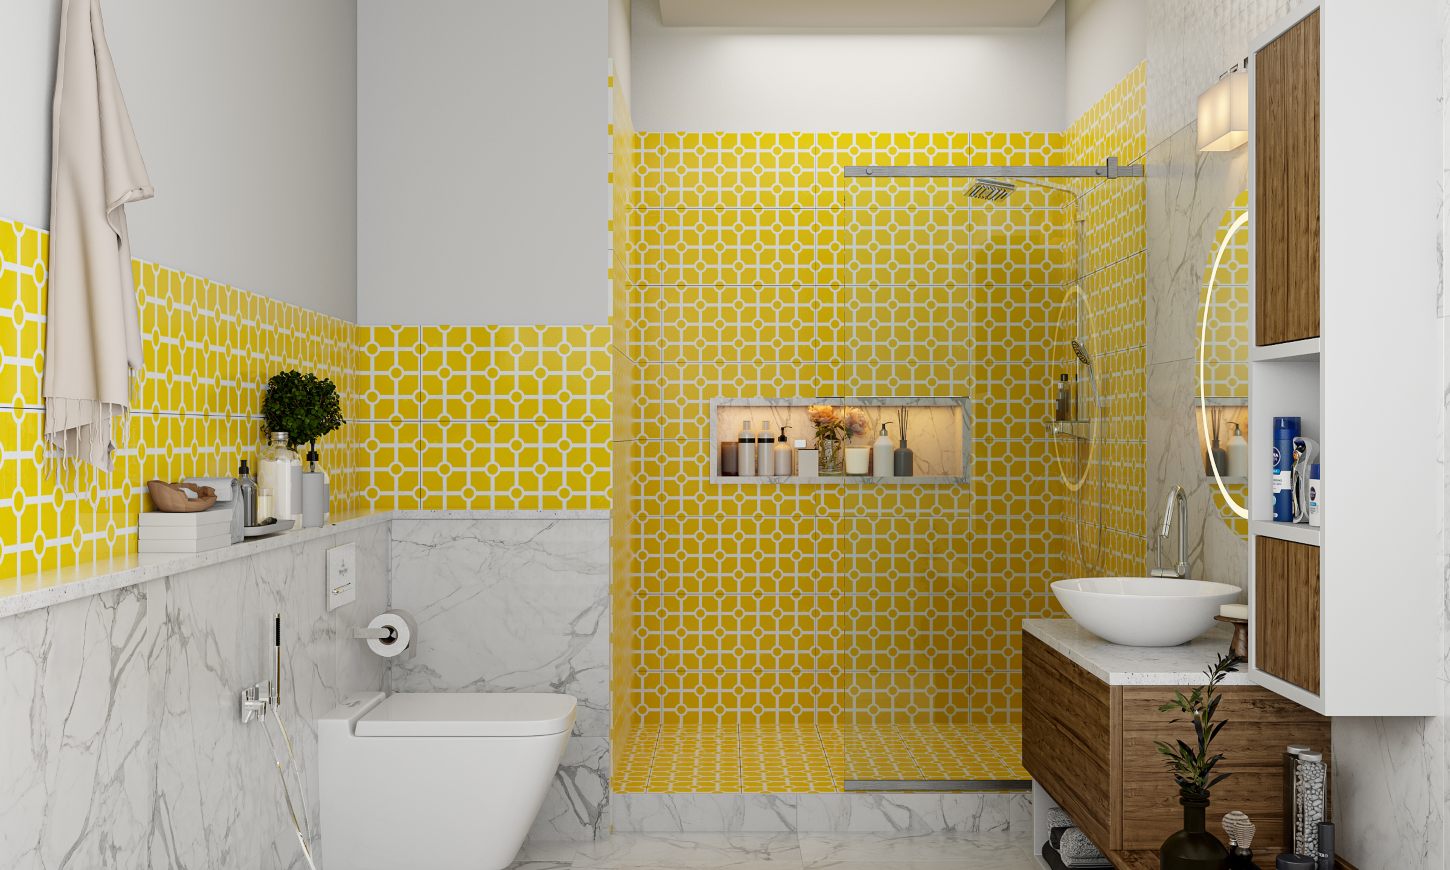 Bathroom designers in bangalore to make a bathroom design with yellow patterned tiles